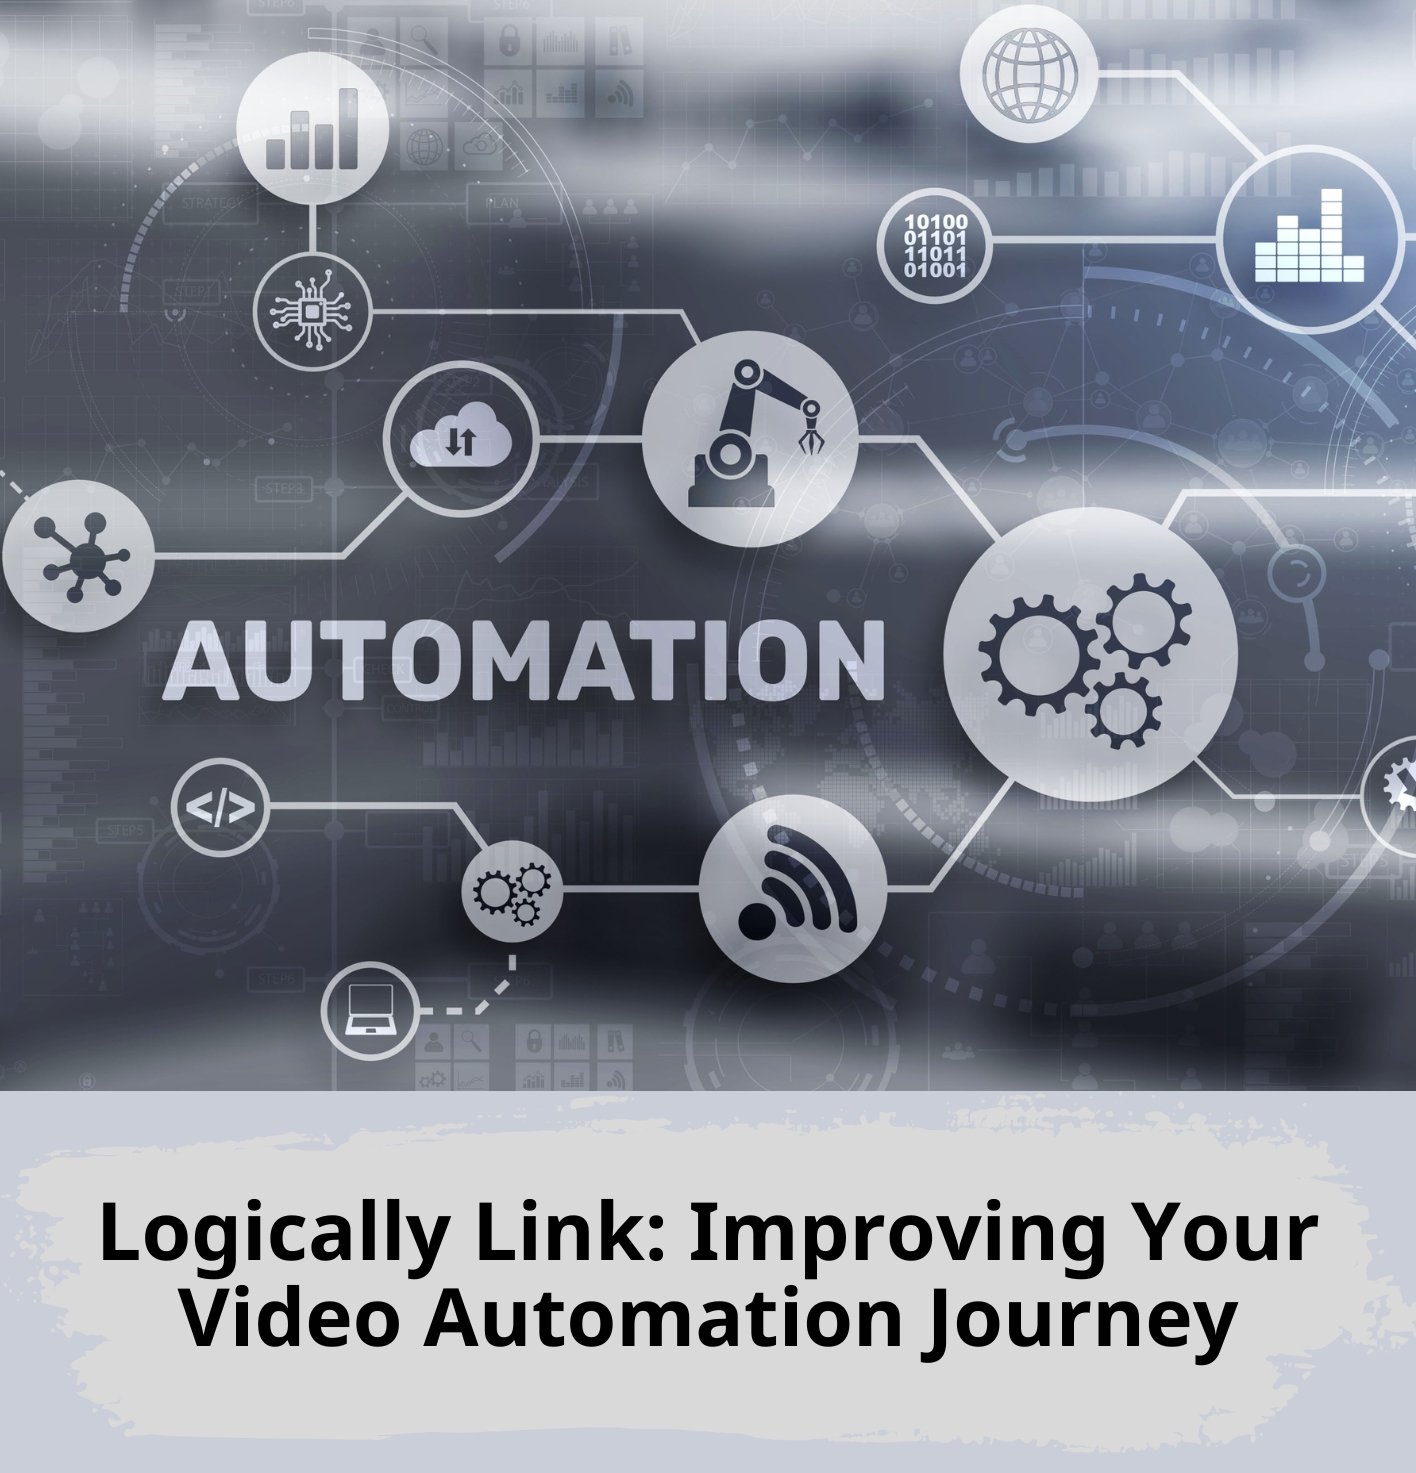 Logically Link: Improving Your Video Automation Journey